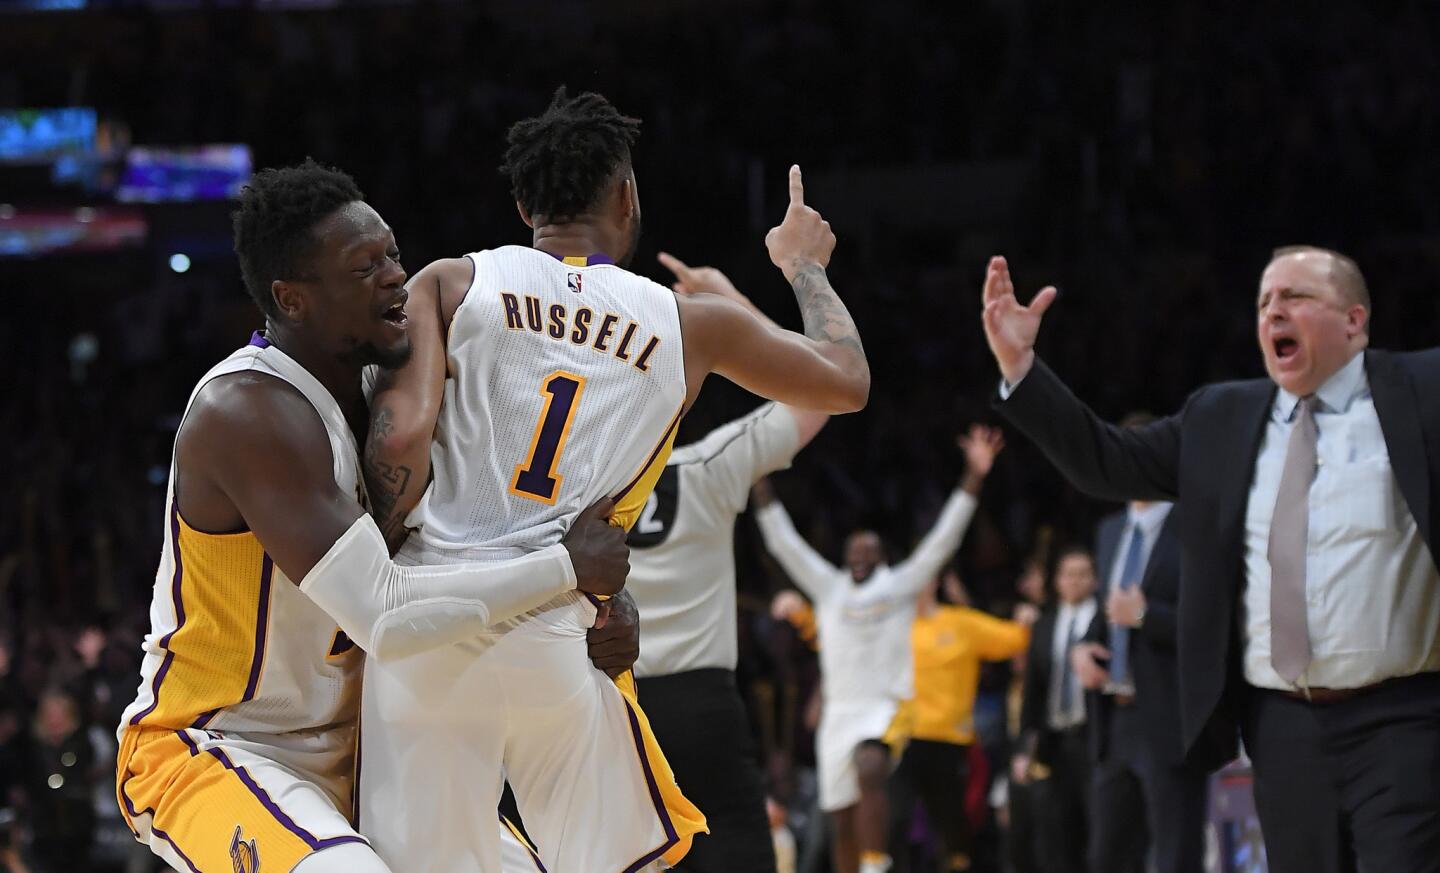 Los Angeles Lakers guard D'Angelo Russell, center, is hugged by forward Julius Randle, left, after hitting a game-winning three point shot as Minnesota Timberwolves Coach Tom Thibodeau reacts during the second half.